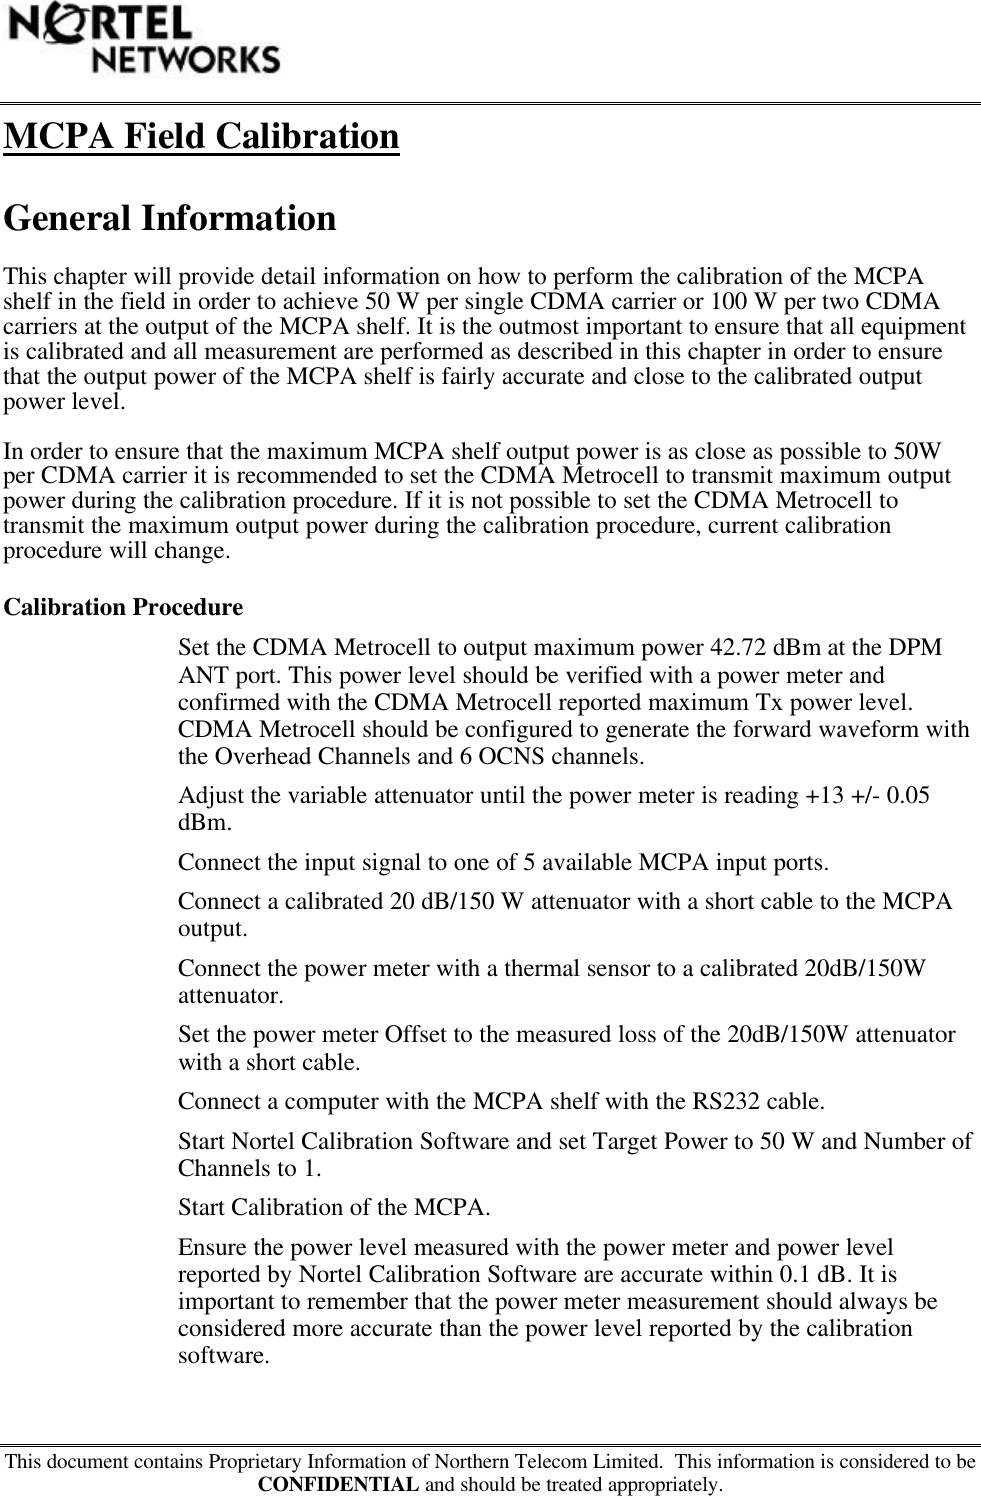 This document contains Proprietary Information of Northern Telecom Limited.  This information is considered to beCONFIDENTIAL and should be treated appropriately.MCPA Field CalibrationGeneral InformationThis chapter will provide detail information on how to perform the calibration of the MCPAshelf in the field in order to achieve 50 W per single CDMA carrier or 100 W per two CDMAcarriers at the output of the MCPA shelf. It is the outmost important to ensure that all equipmentis calibrated and all measurement are performed as described in this chapter in order to ensurethat the output power of the MCPA shelf is fairly accurate and close to the calibrated outputpower level.In order to ensure that the maximum MCPA shelf output power is as close as possible to 50Wper CDMA carrier it is recommended to set the CDMA Metrocell to transmit maximum outputpower during the calibration procedure. If it is not possible to set the CDMA Metrocell totransmit the maximum output power during the calibration procedure, current calibrationprocedure will change.Calibration ProcedureSet the CDMA Metrocell to output maximum power 42.72 dBm at the DPMANT port. This power level should be verified with a power meter andconfirmed with the CDMA Metrocell reported maximum Tx power level.CDMA Metrocell should be configured to generate the forward waveform withthe Overhead Channels and 6 OCNS channels.Adjust the variable attenuator until the power meter is reading +13 +/- 0.05dBm.Connect the input signal to one of 5 available MCPA input ports.Connect a calibrated 20 dB/150 W attenuator with a short cable to the MCPAoutput.Connect the power meter with a thermal sensor to a calibrated 20dB/150Wattenuator.Set the power meter Offset to the measured loss of the 20dB/150W attenuatorwith a short cable.Connect a computer with the MCPA shelf with the RS232 cable.Start Nortel Calibration Software and set Target Power to 50 W and Number ofChannels to 1.Start Calibration of the MCPA.Ensure the power level measured with the power meter and power levelreported by Nortel Calibration Software are accurate within 0.1 dB. It isimportant to remember that the power meter measurement should always beconsidered more accurate than the power level reported by the calibrationsoftware.